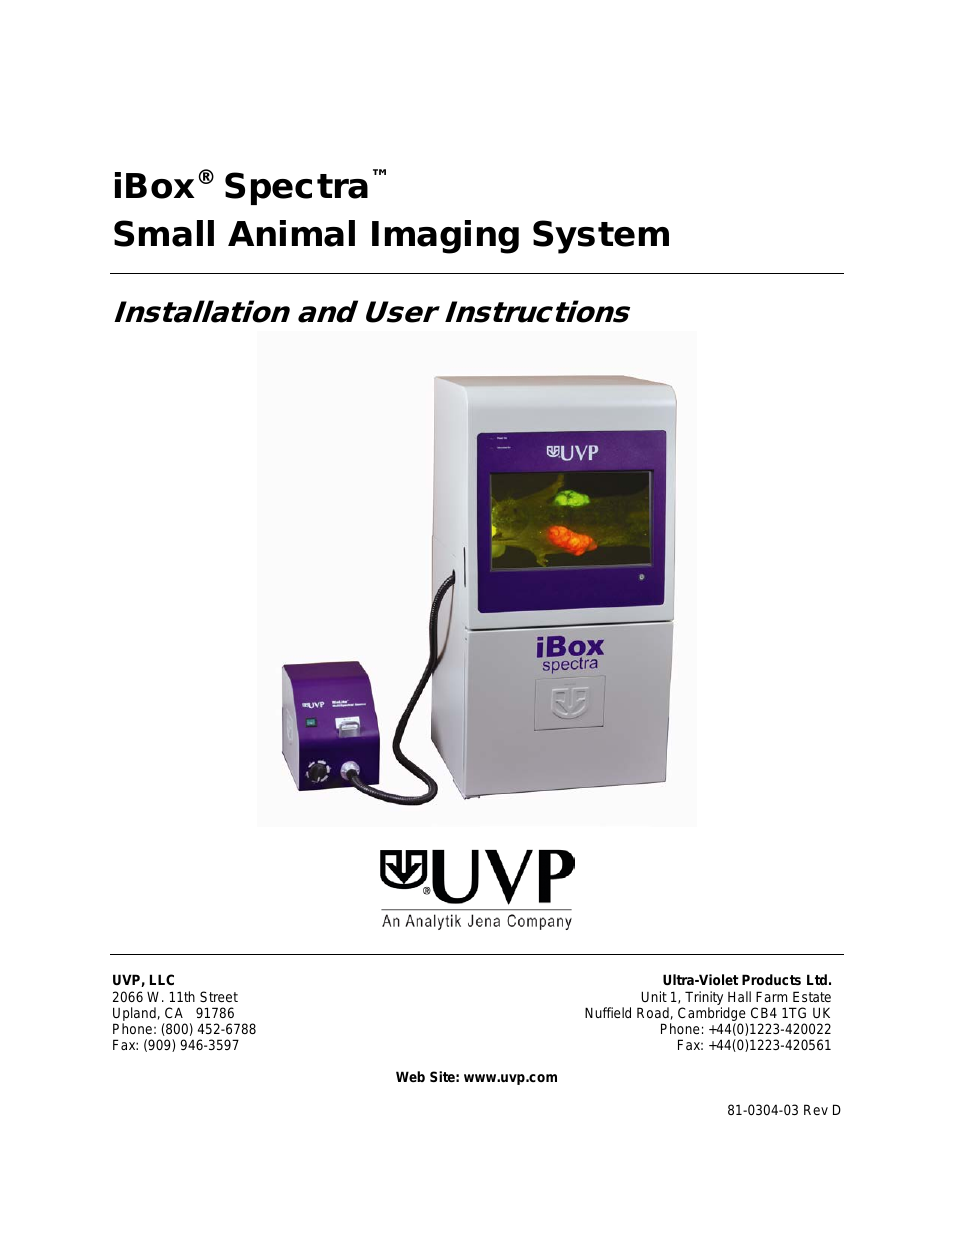 iBox Spectra Small Animal Imaging System